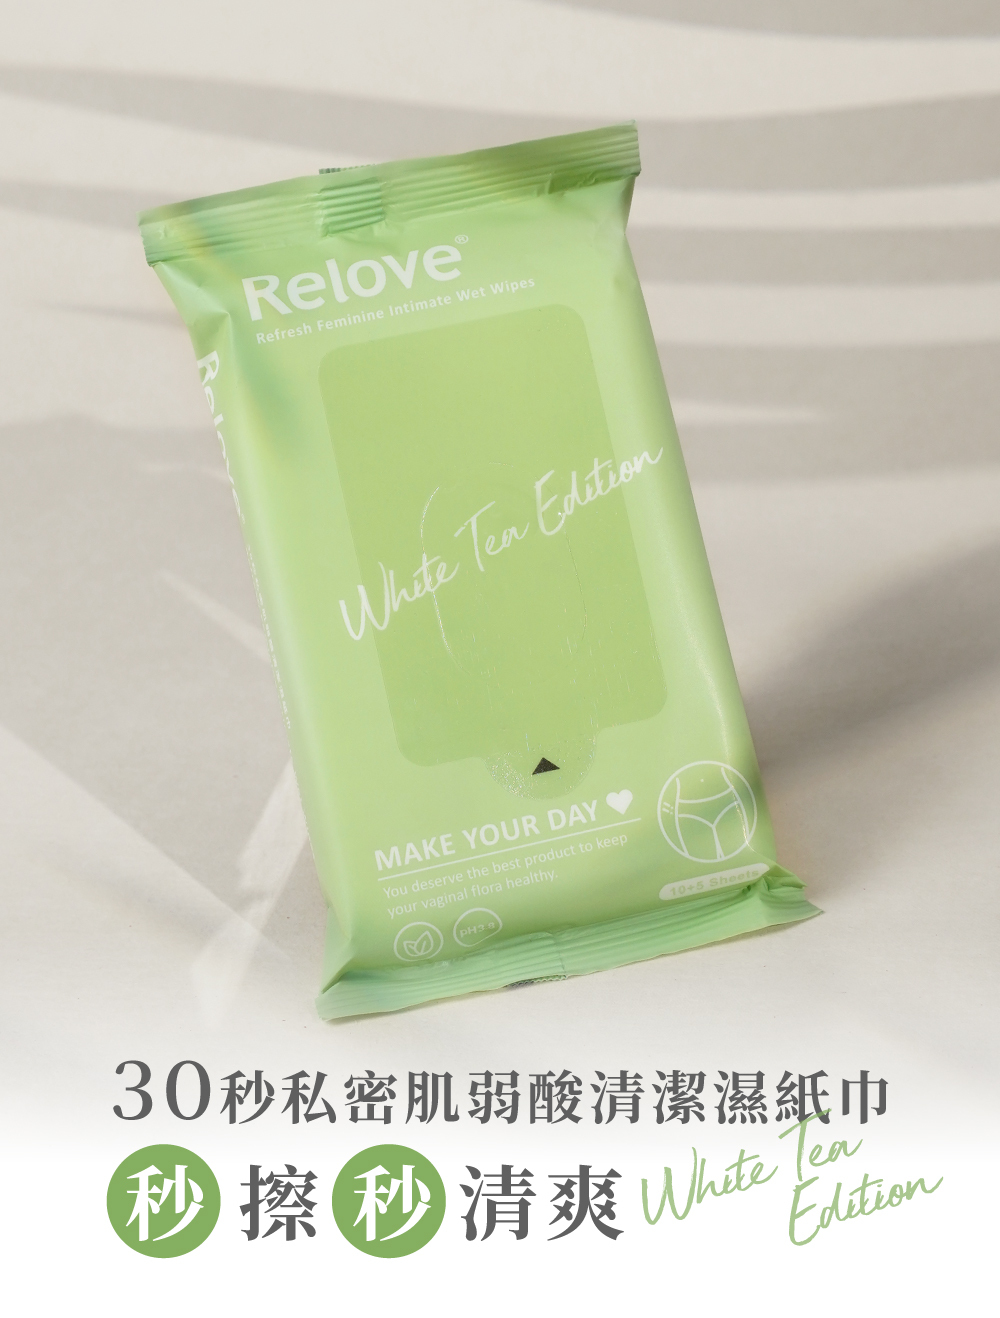 Relove Intimate Hygiene 30 second wet wipes - Adult Loving